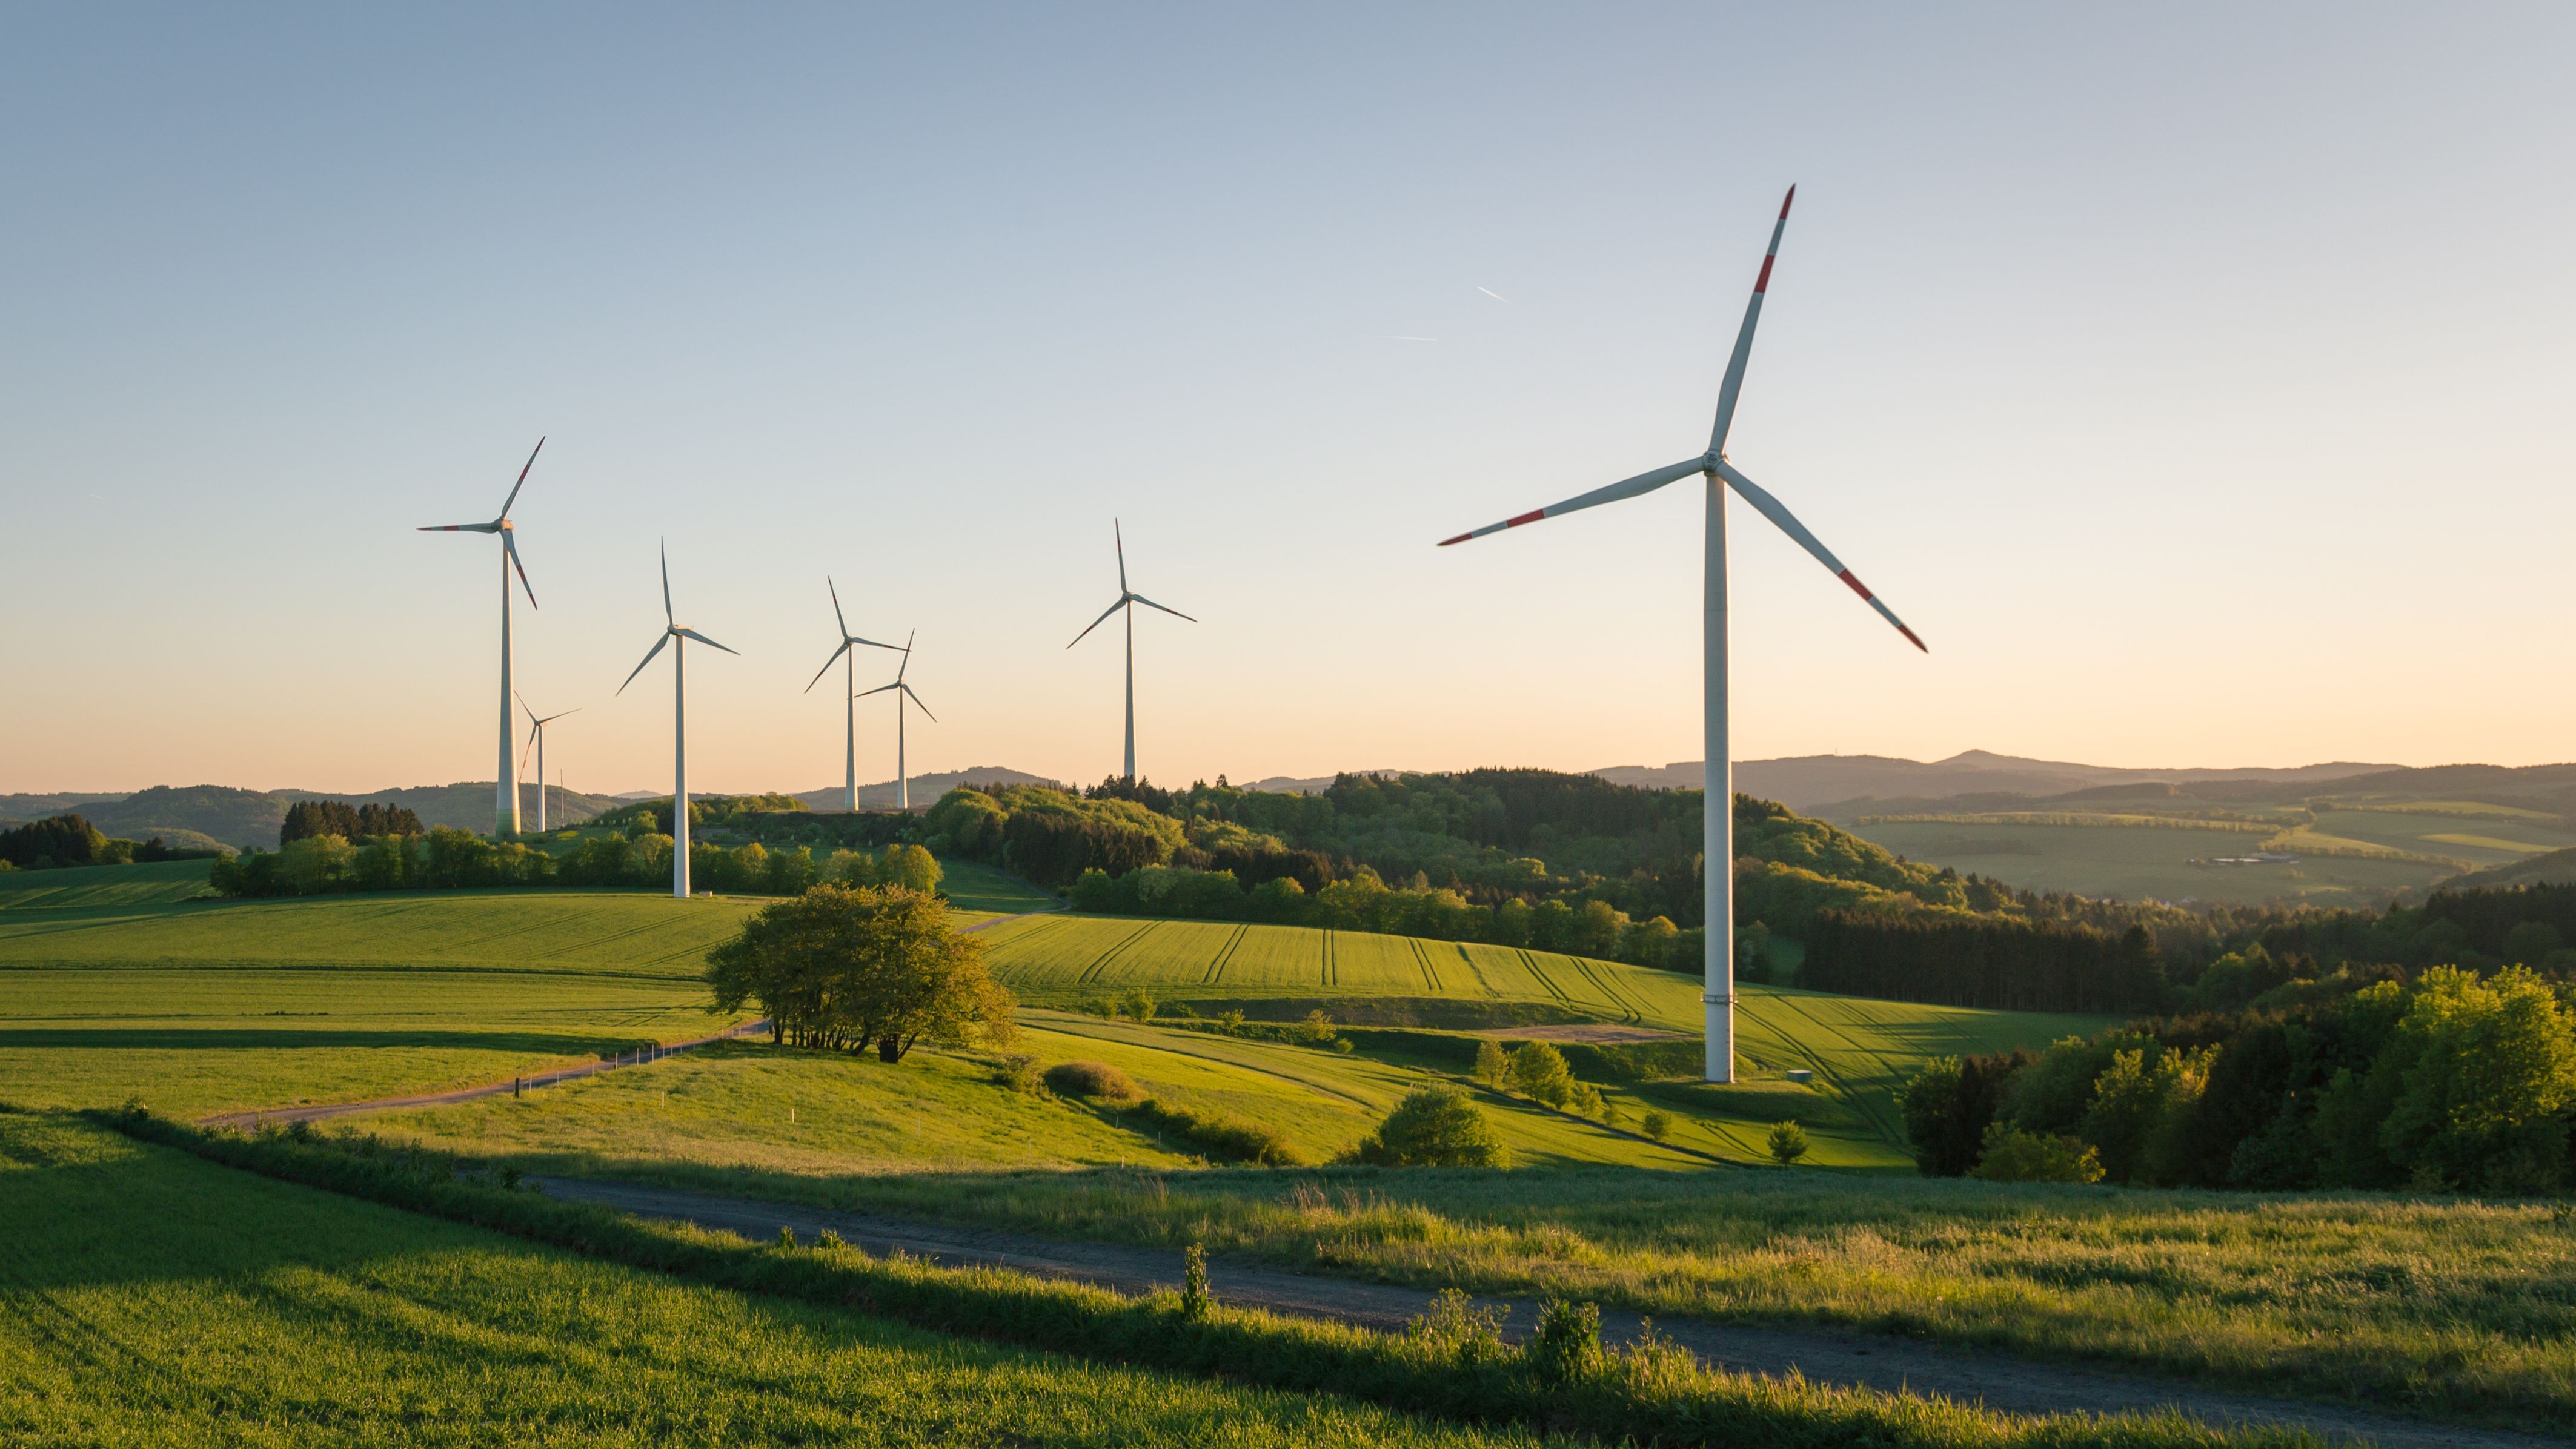 Land use: exploring clean energy options for farmers and landowners